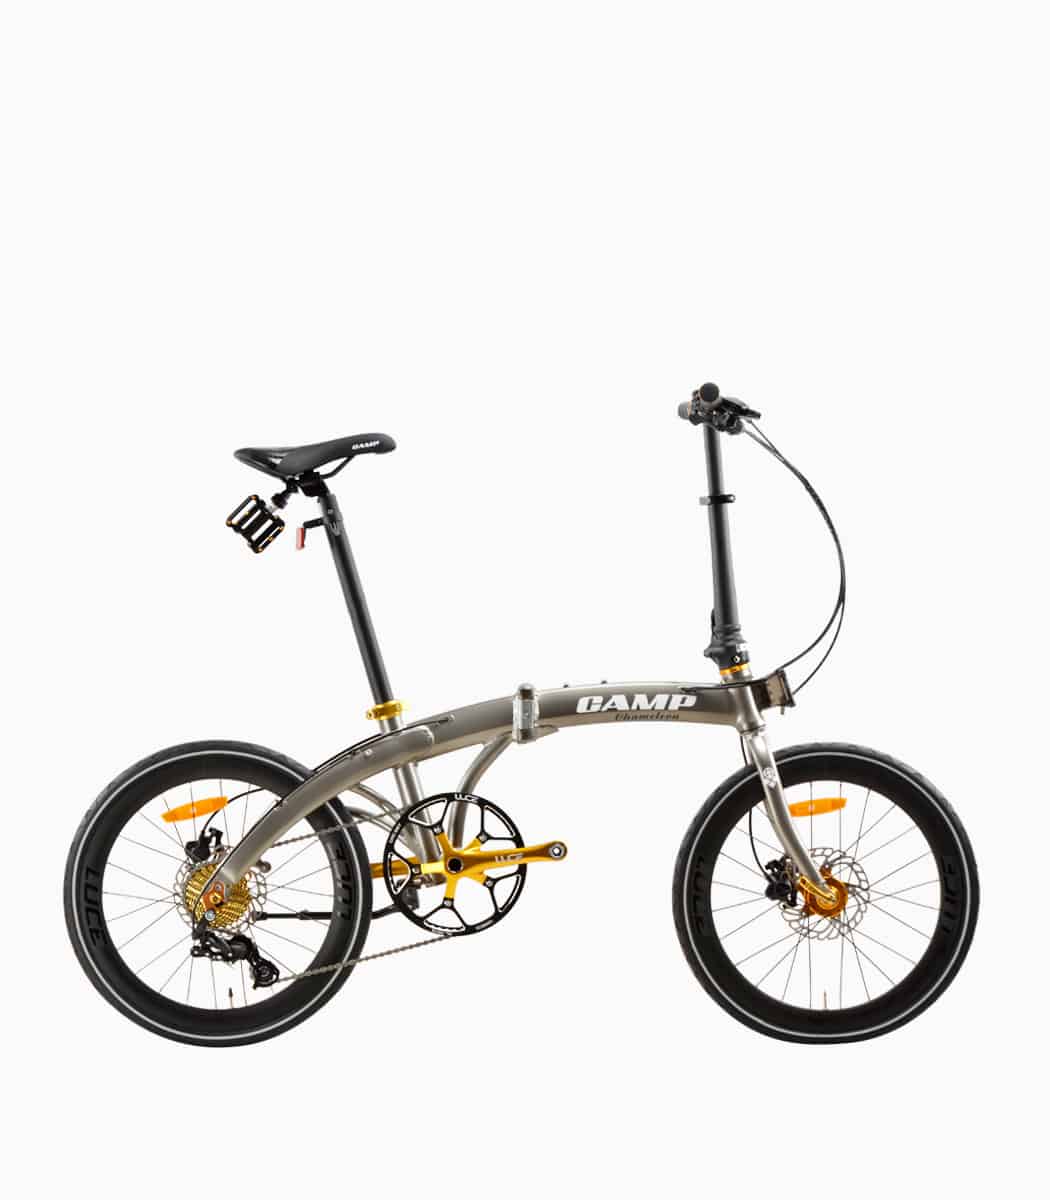 CAMP Chameleon (TITANIUM SILVER) foldable bicycle with reflective tyres right